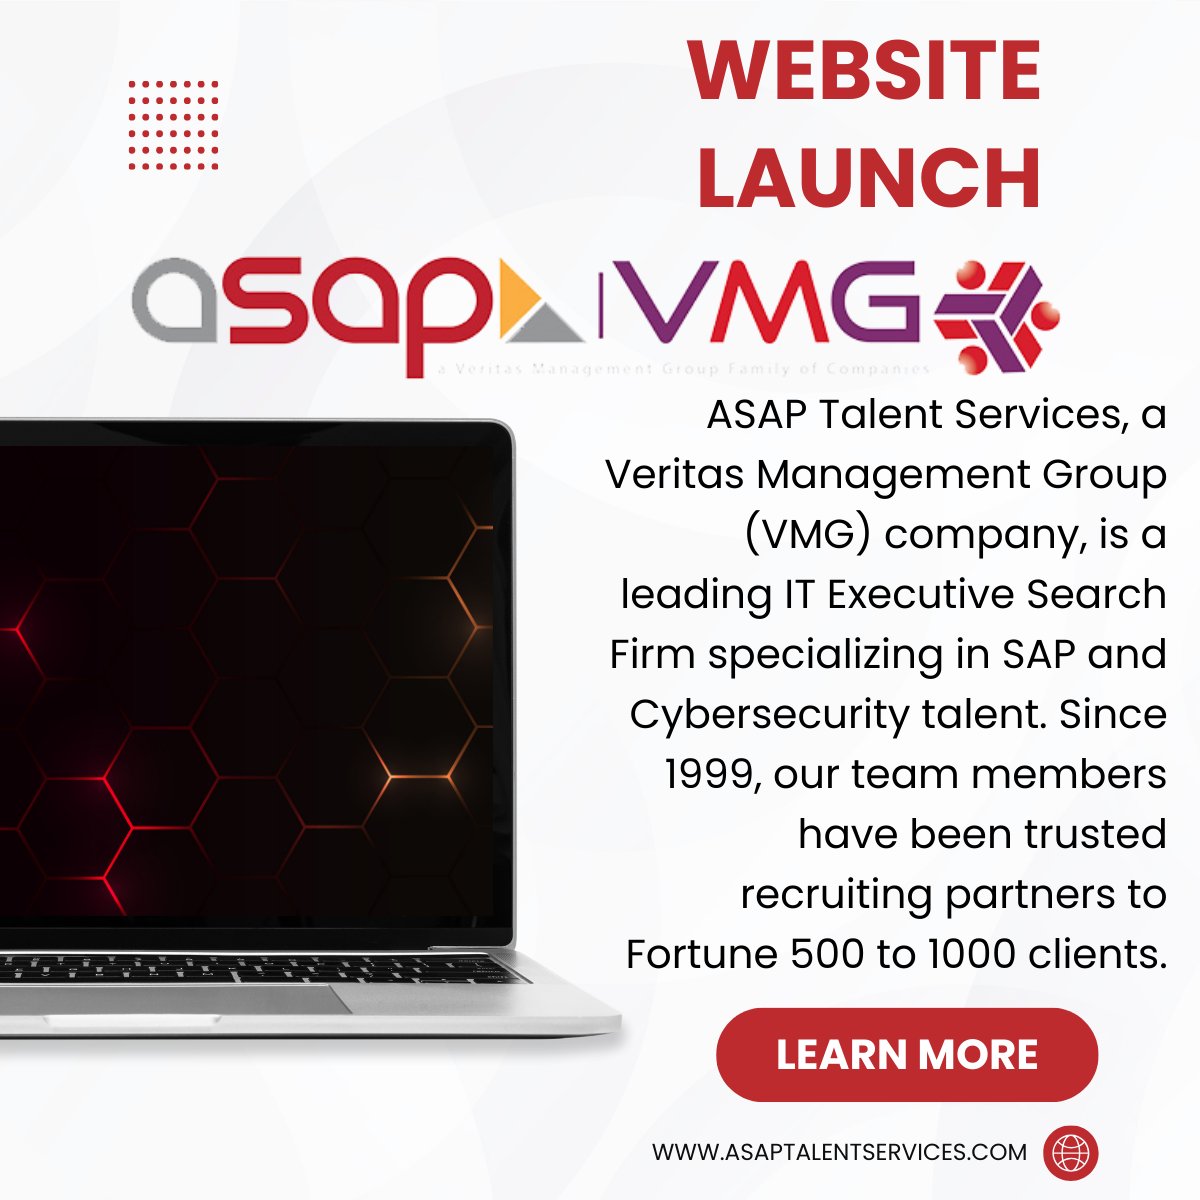 Stay tuned for the launch of our new website, where innovation meets efficiency. 

Coming soon at asaptalentservices.com

#NewBeginnings #TalentSolutions #ComingSoon #FutureIsHere #ASAPTalentServices #VeritasManagementGroup #Merger #Acquisition #WebsiteLaunch